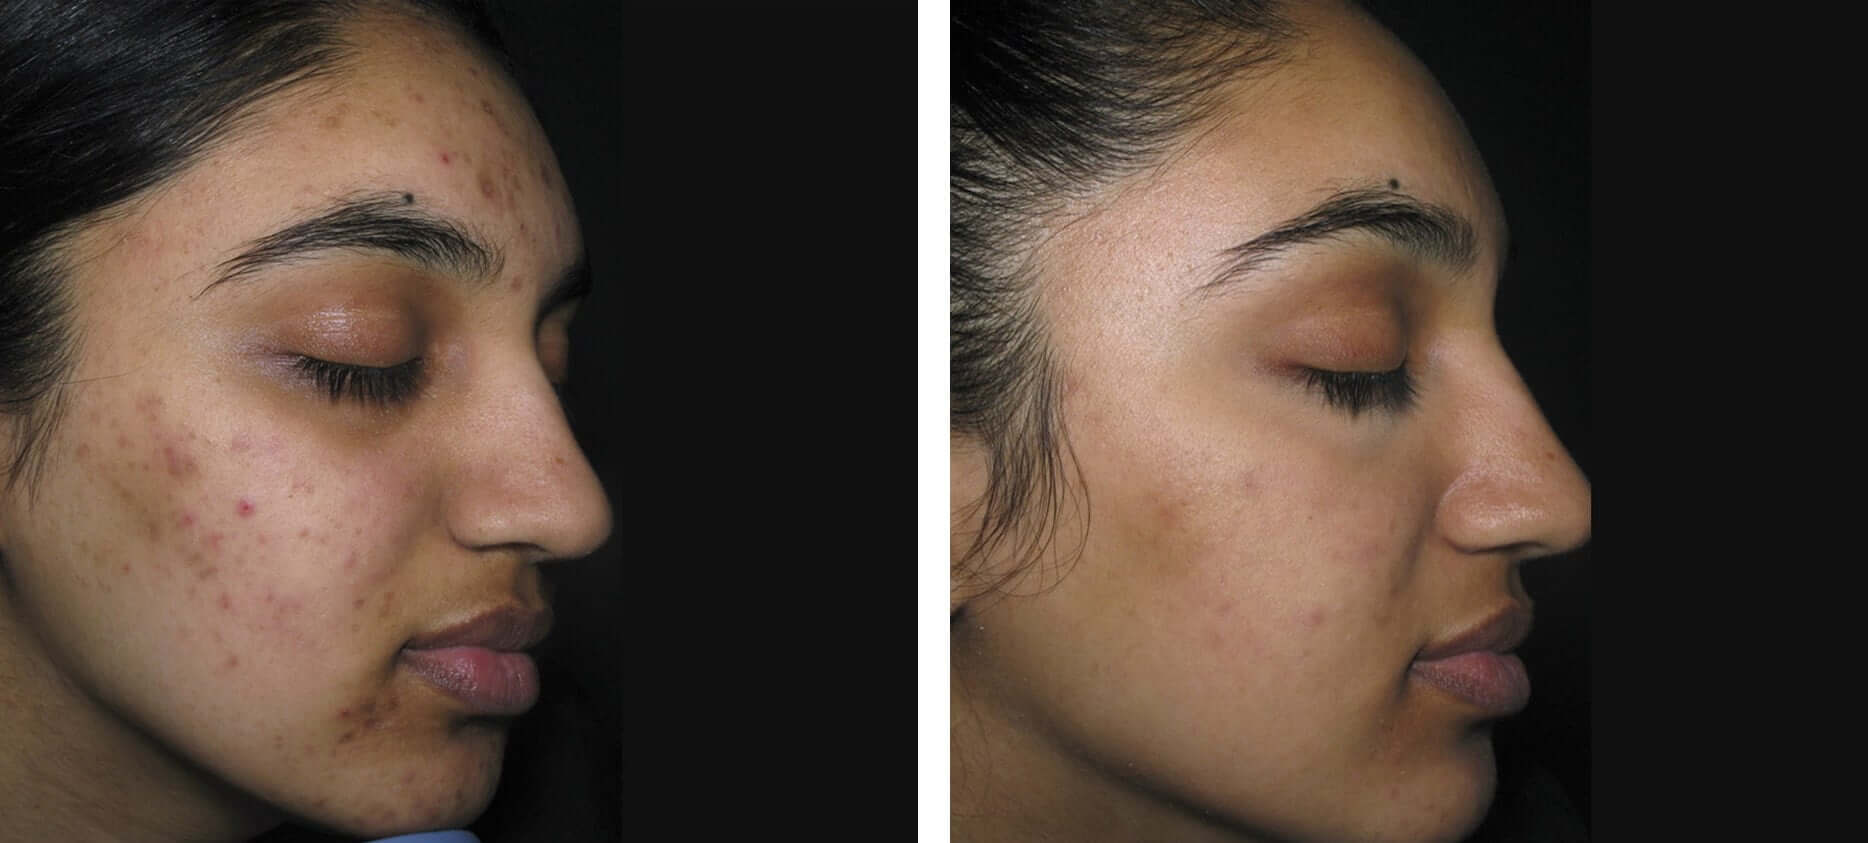 Acne & acne scars treatment before and after at Kingsway Dermatology